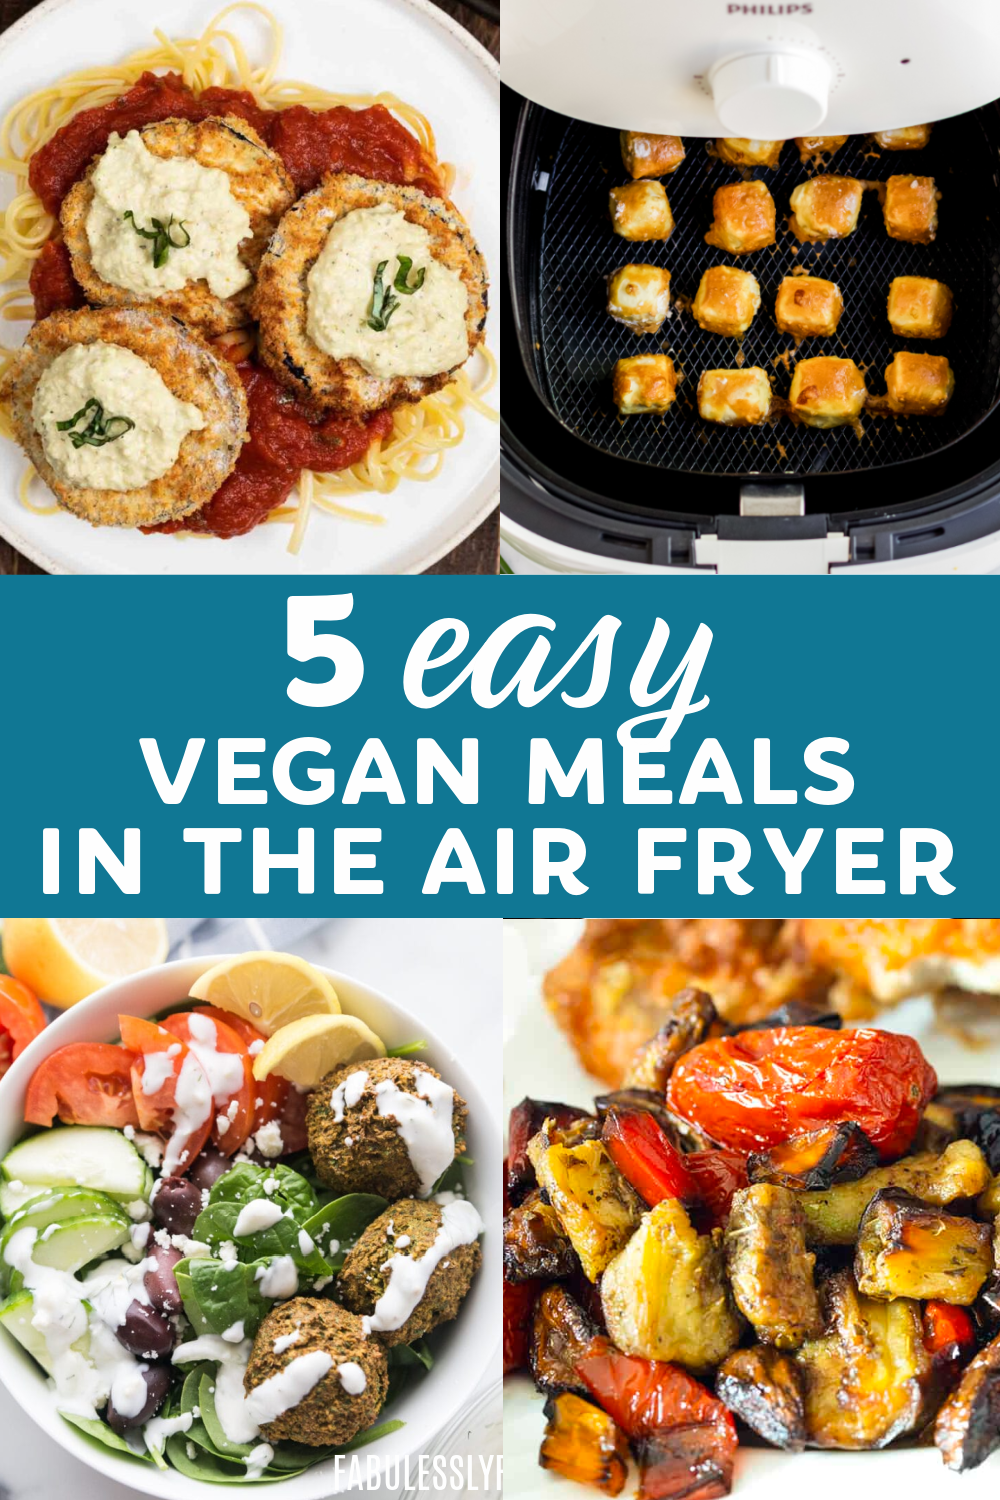 Air Fryer Vegan Dinner is easy and simple with these 5 delicious air fryer vegan recipes